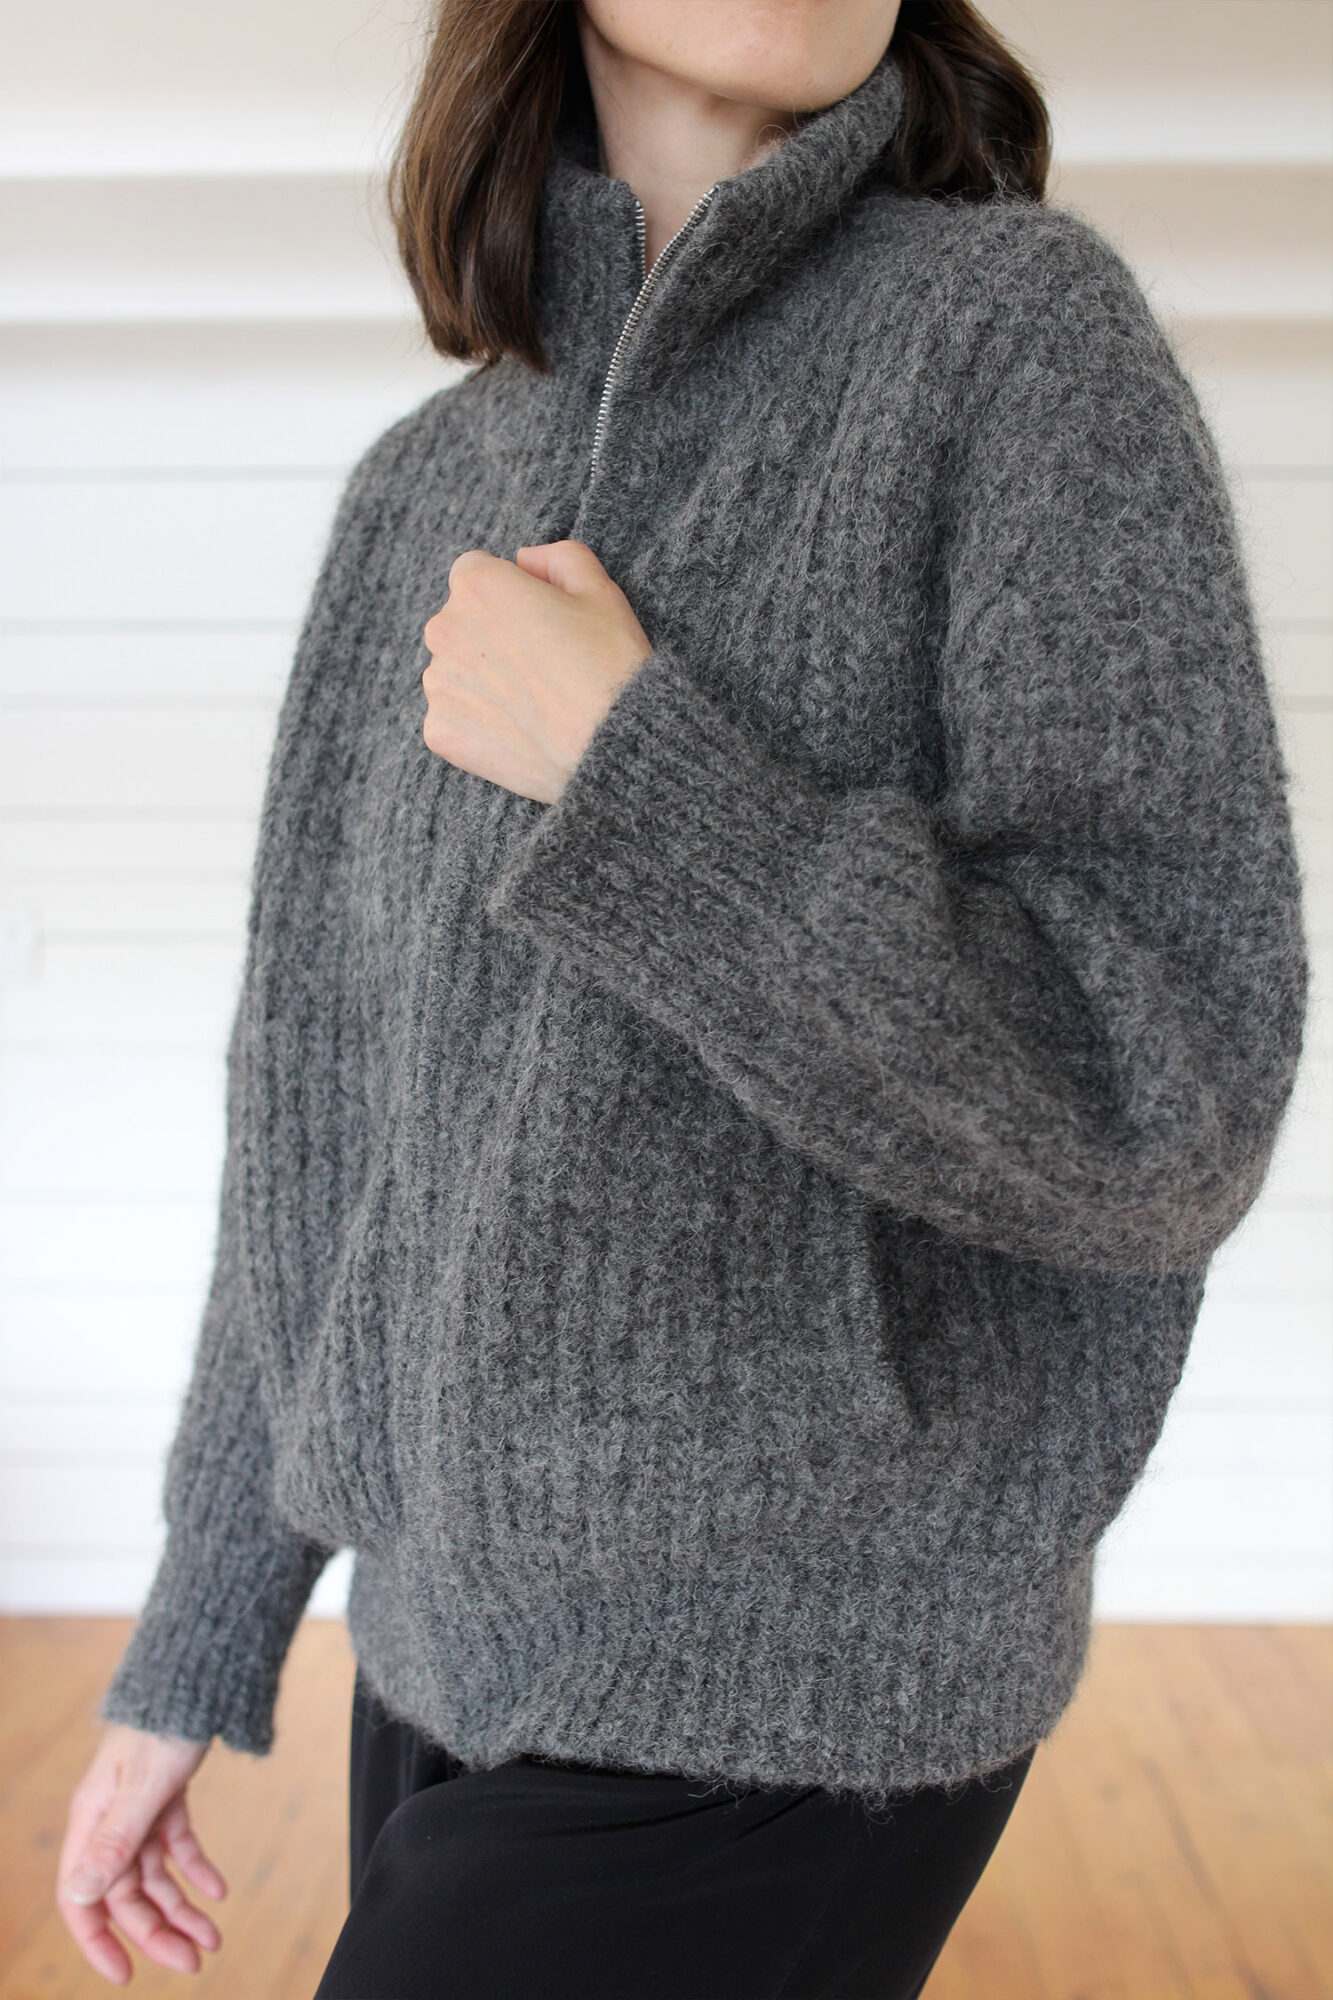 Style Bee - The Makings of a Modern Heirloom with Bare Knitwear